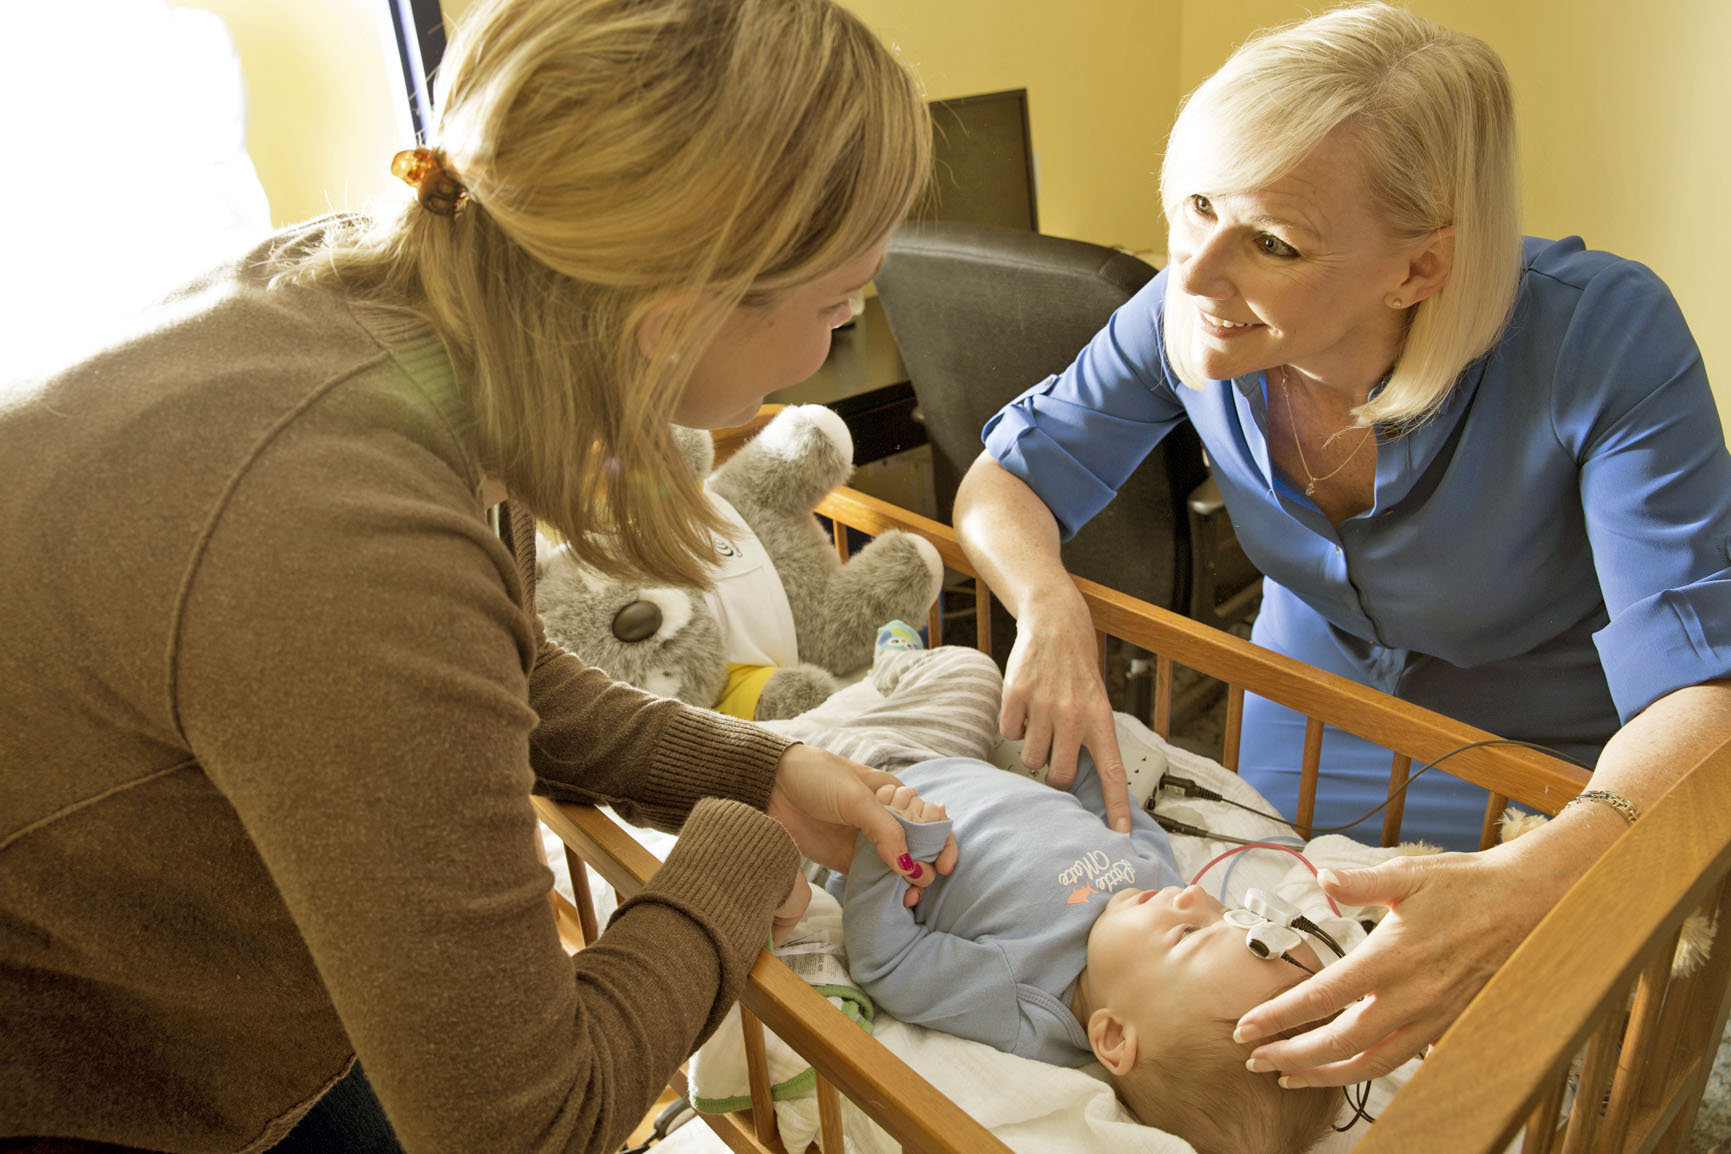 A woman holding a baby while a provider examines the baby's ear